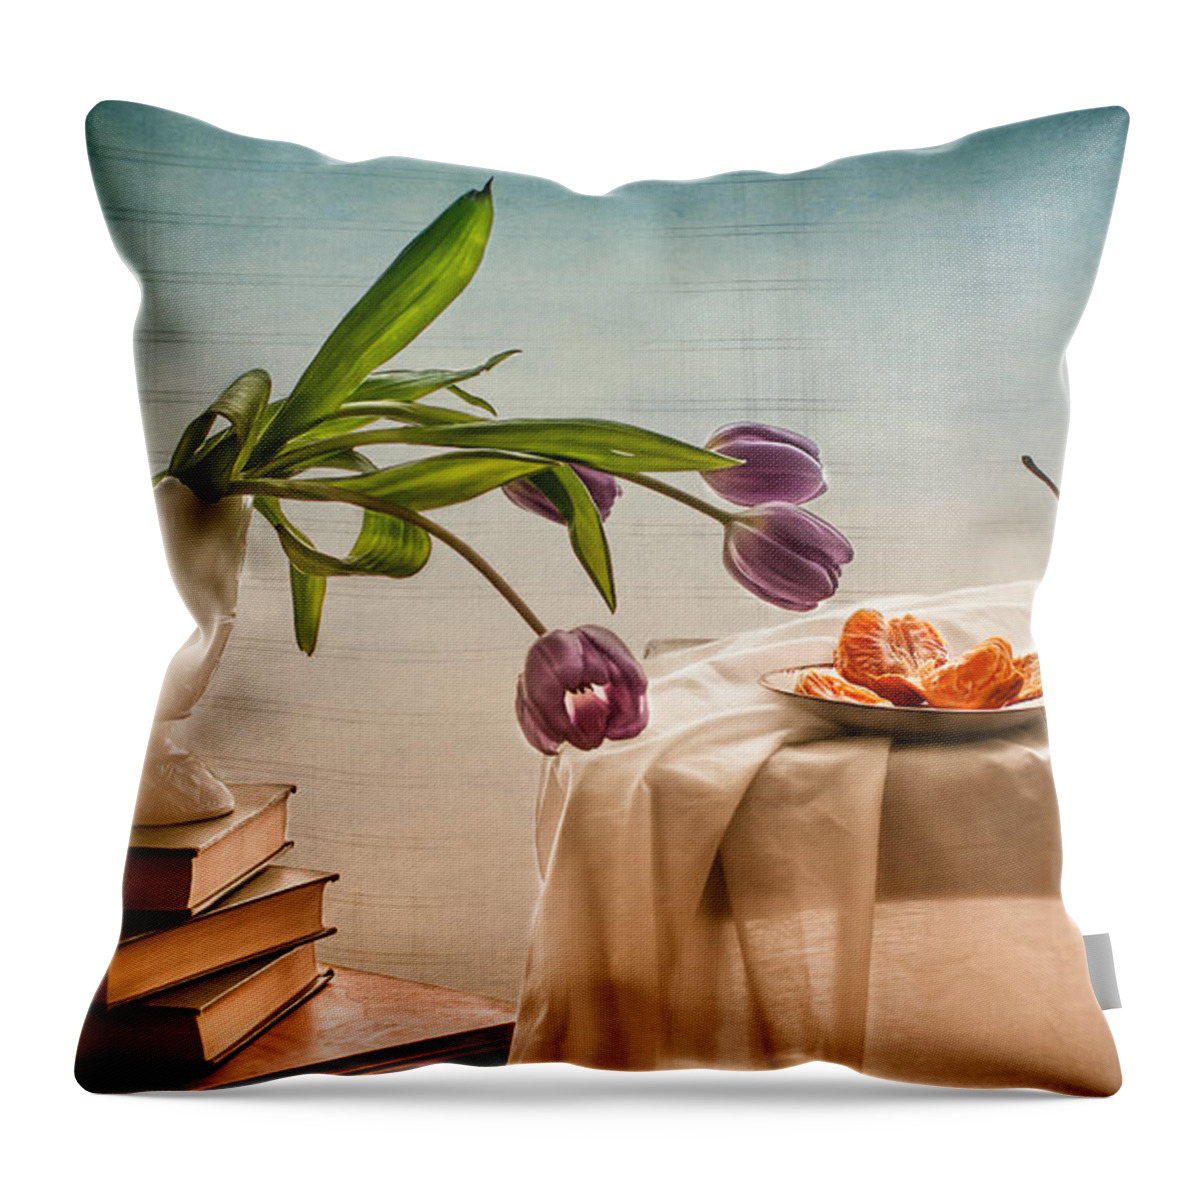 Morning Throw Pillow featuring the photograph Casual Morning with Tulips, Orange and Pear by Maggie Terlecki